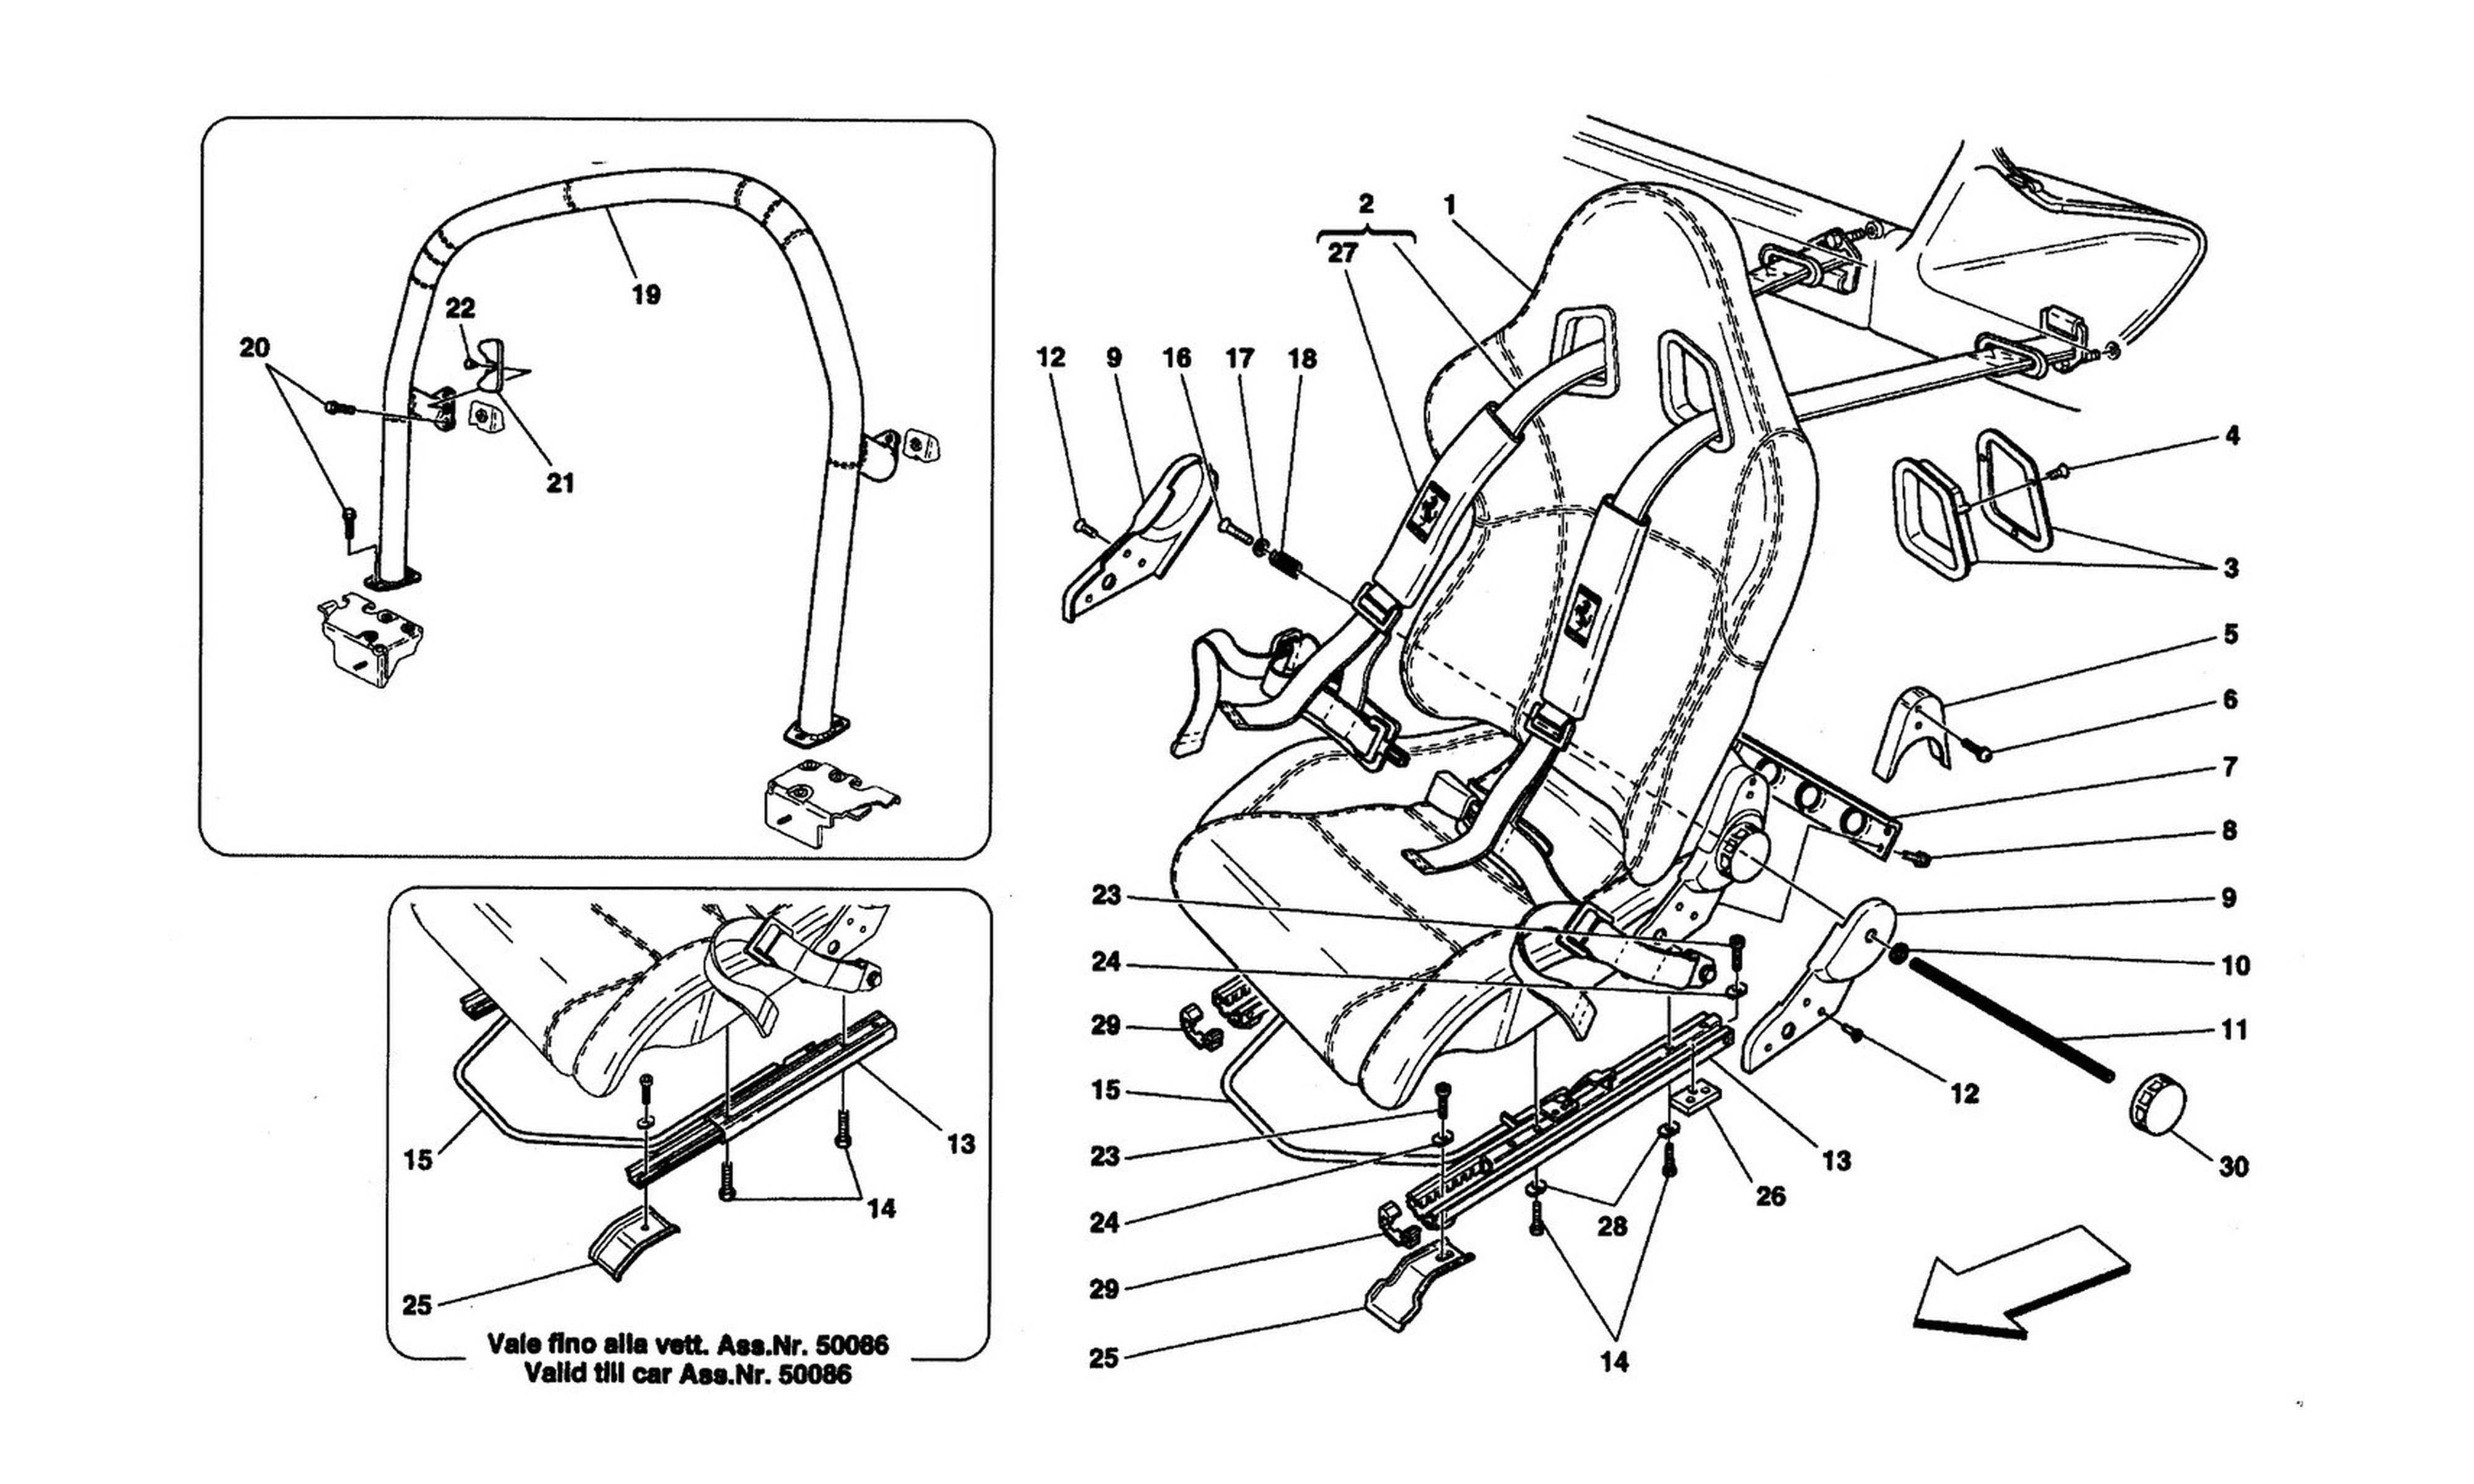 Schematic: Racing Seat-4 Point Belts-Roll Bar